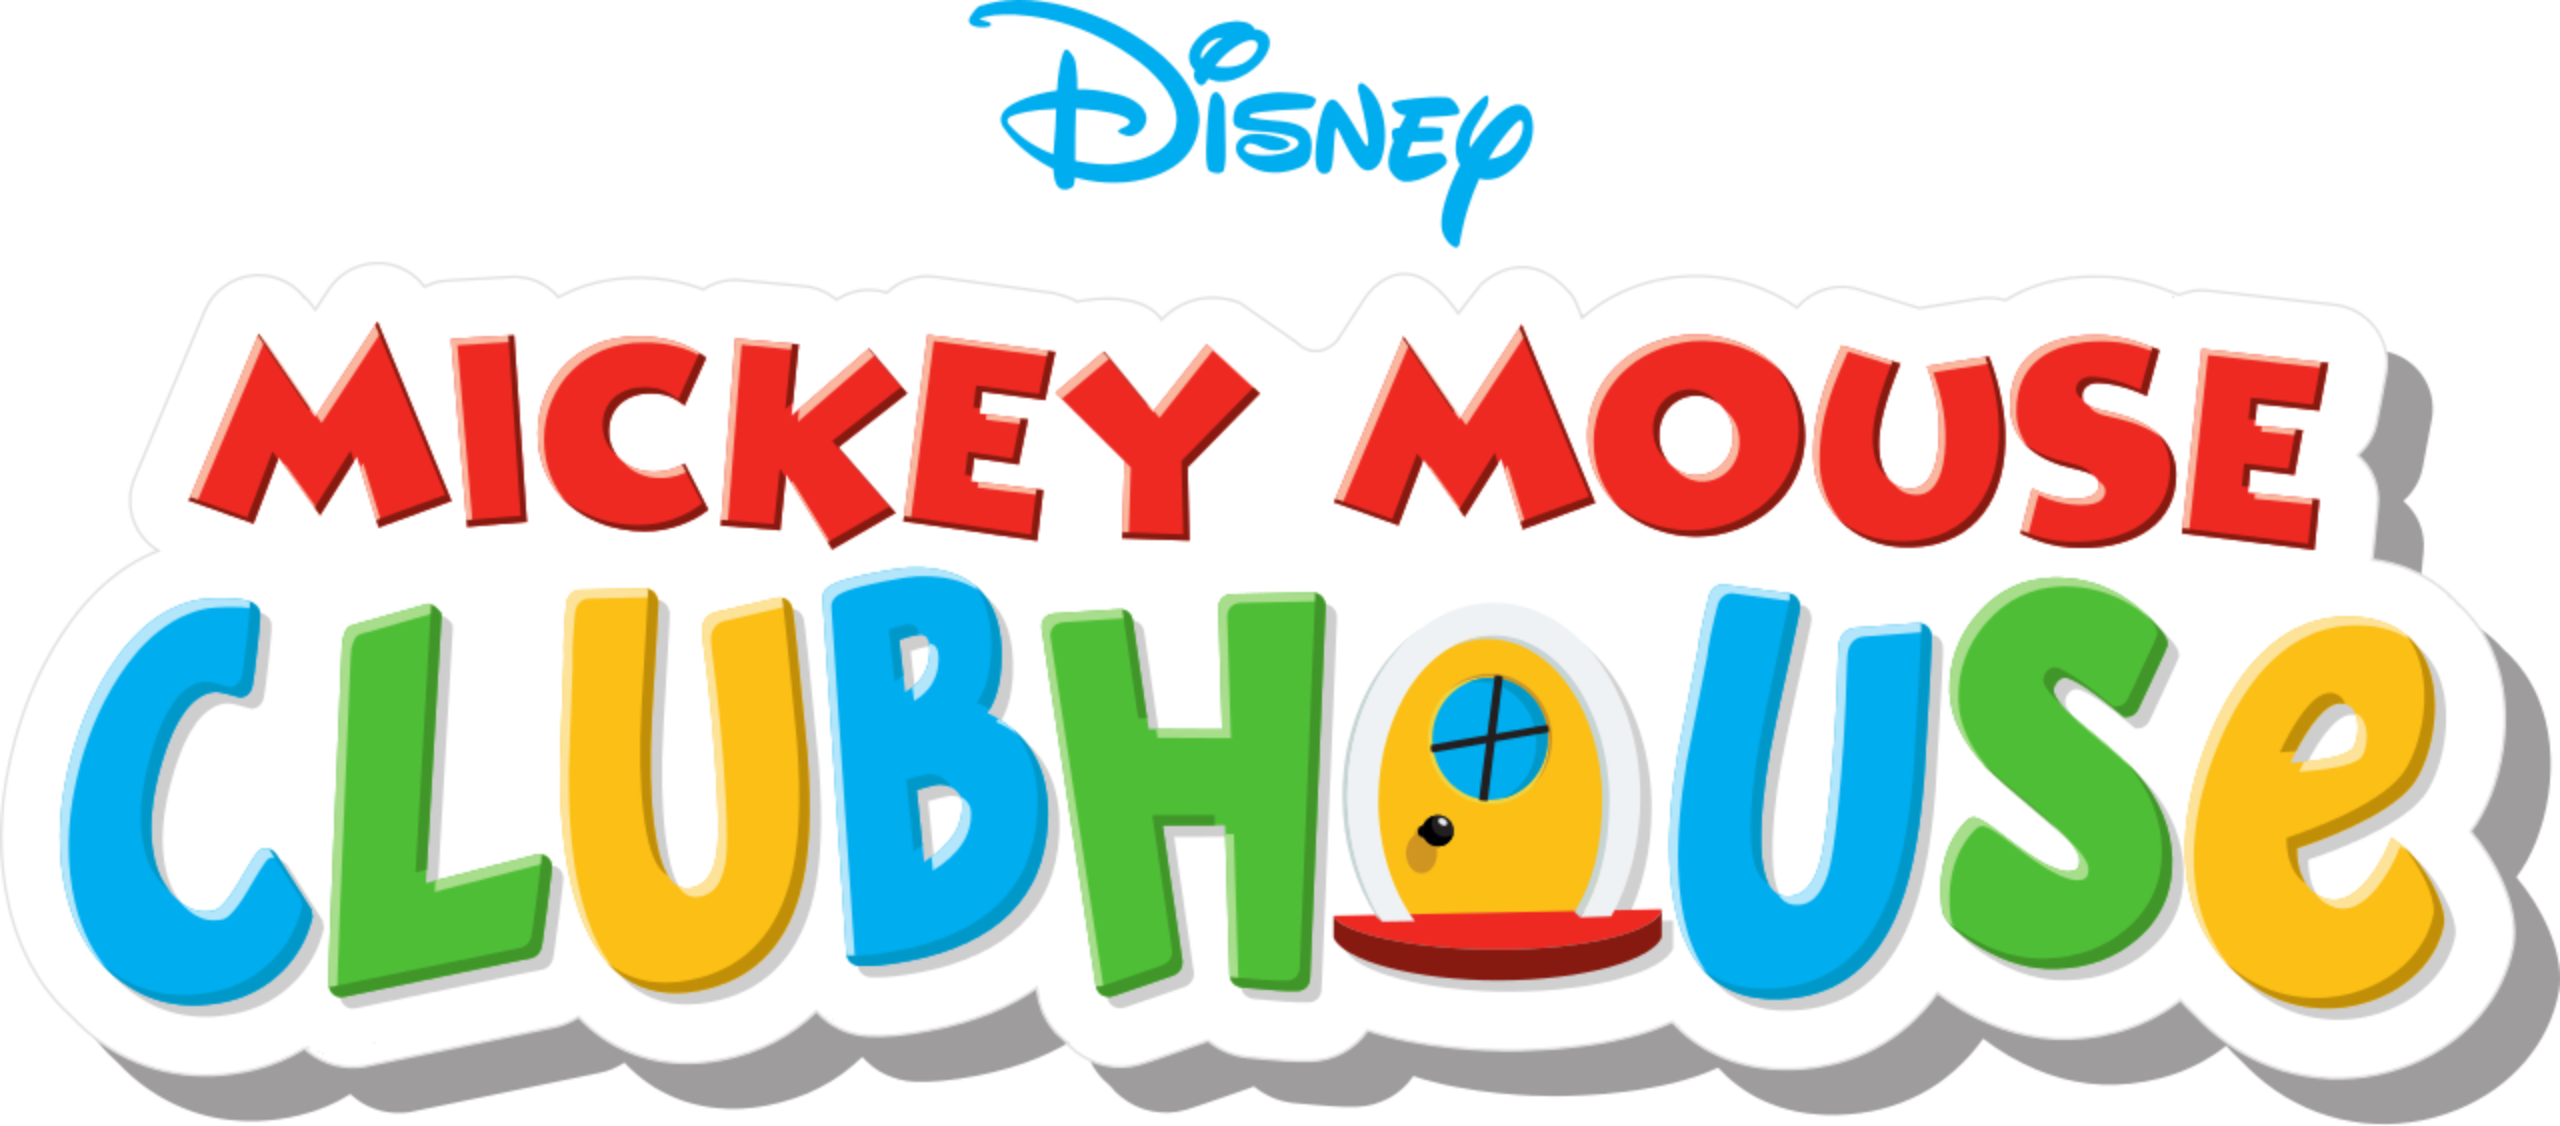 Mickey Mouse Clubhouse Volume 2 